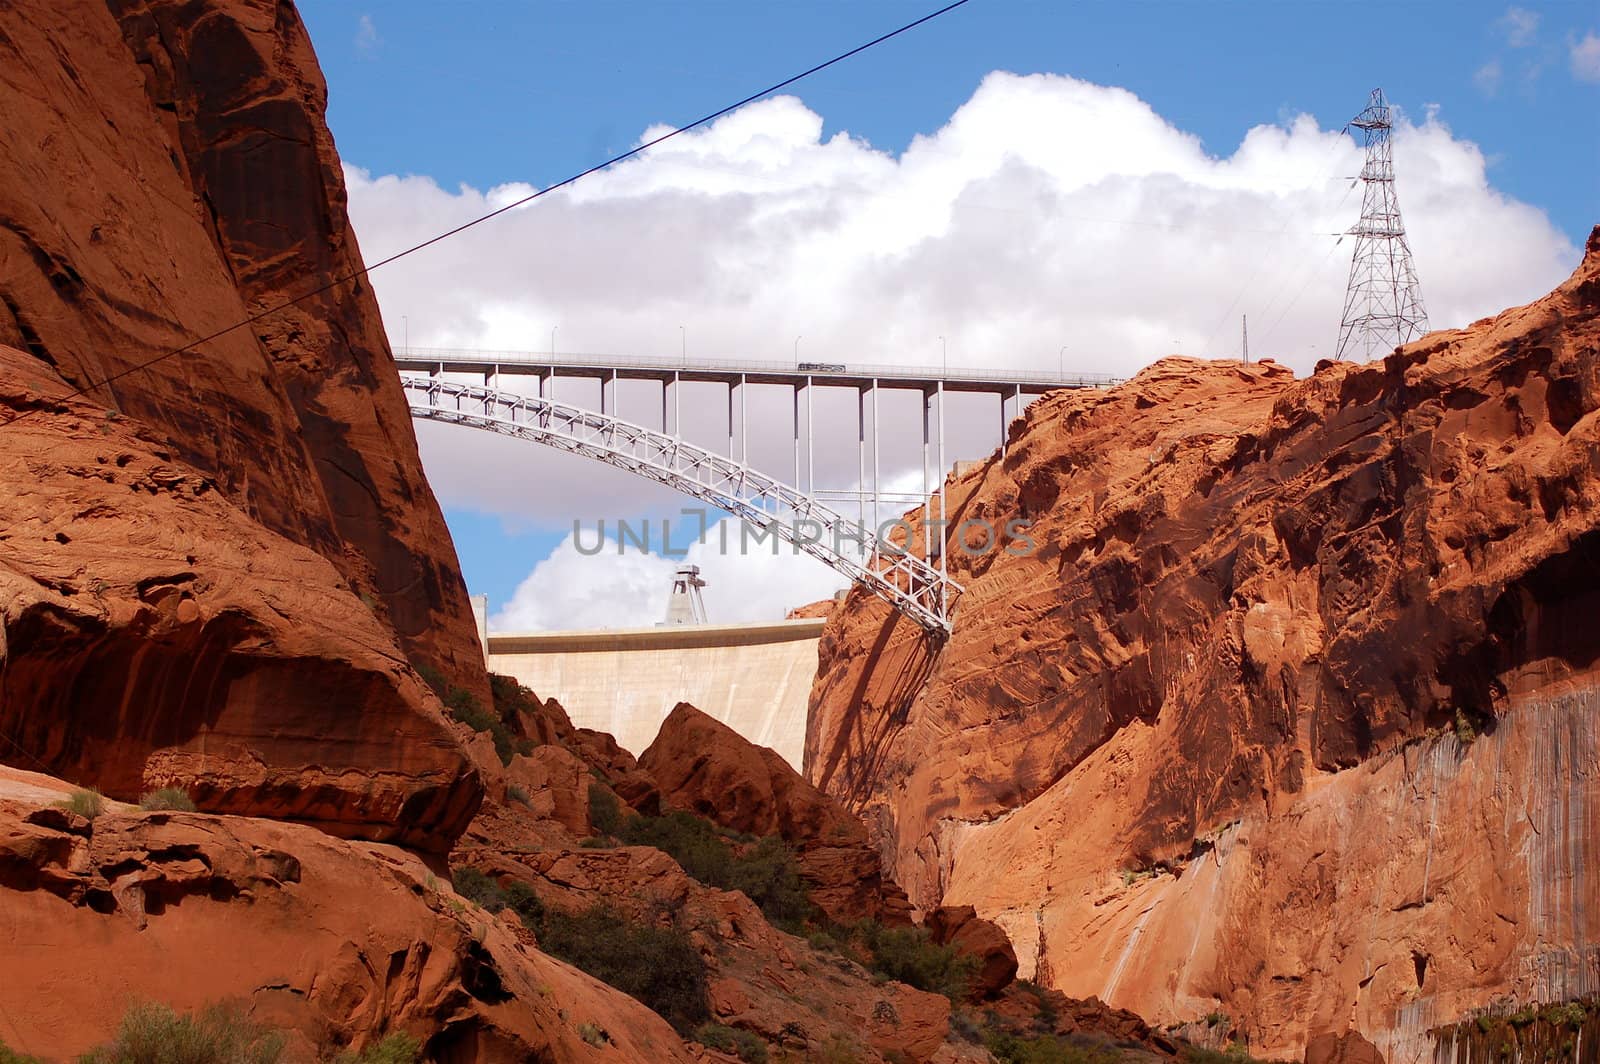 Glen Dam Bridge spanning the Colorado River, Arizona - with red rock either side and a bright blue sky filled with fluffy white clouds